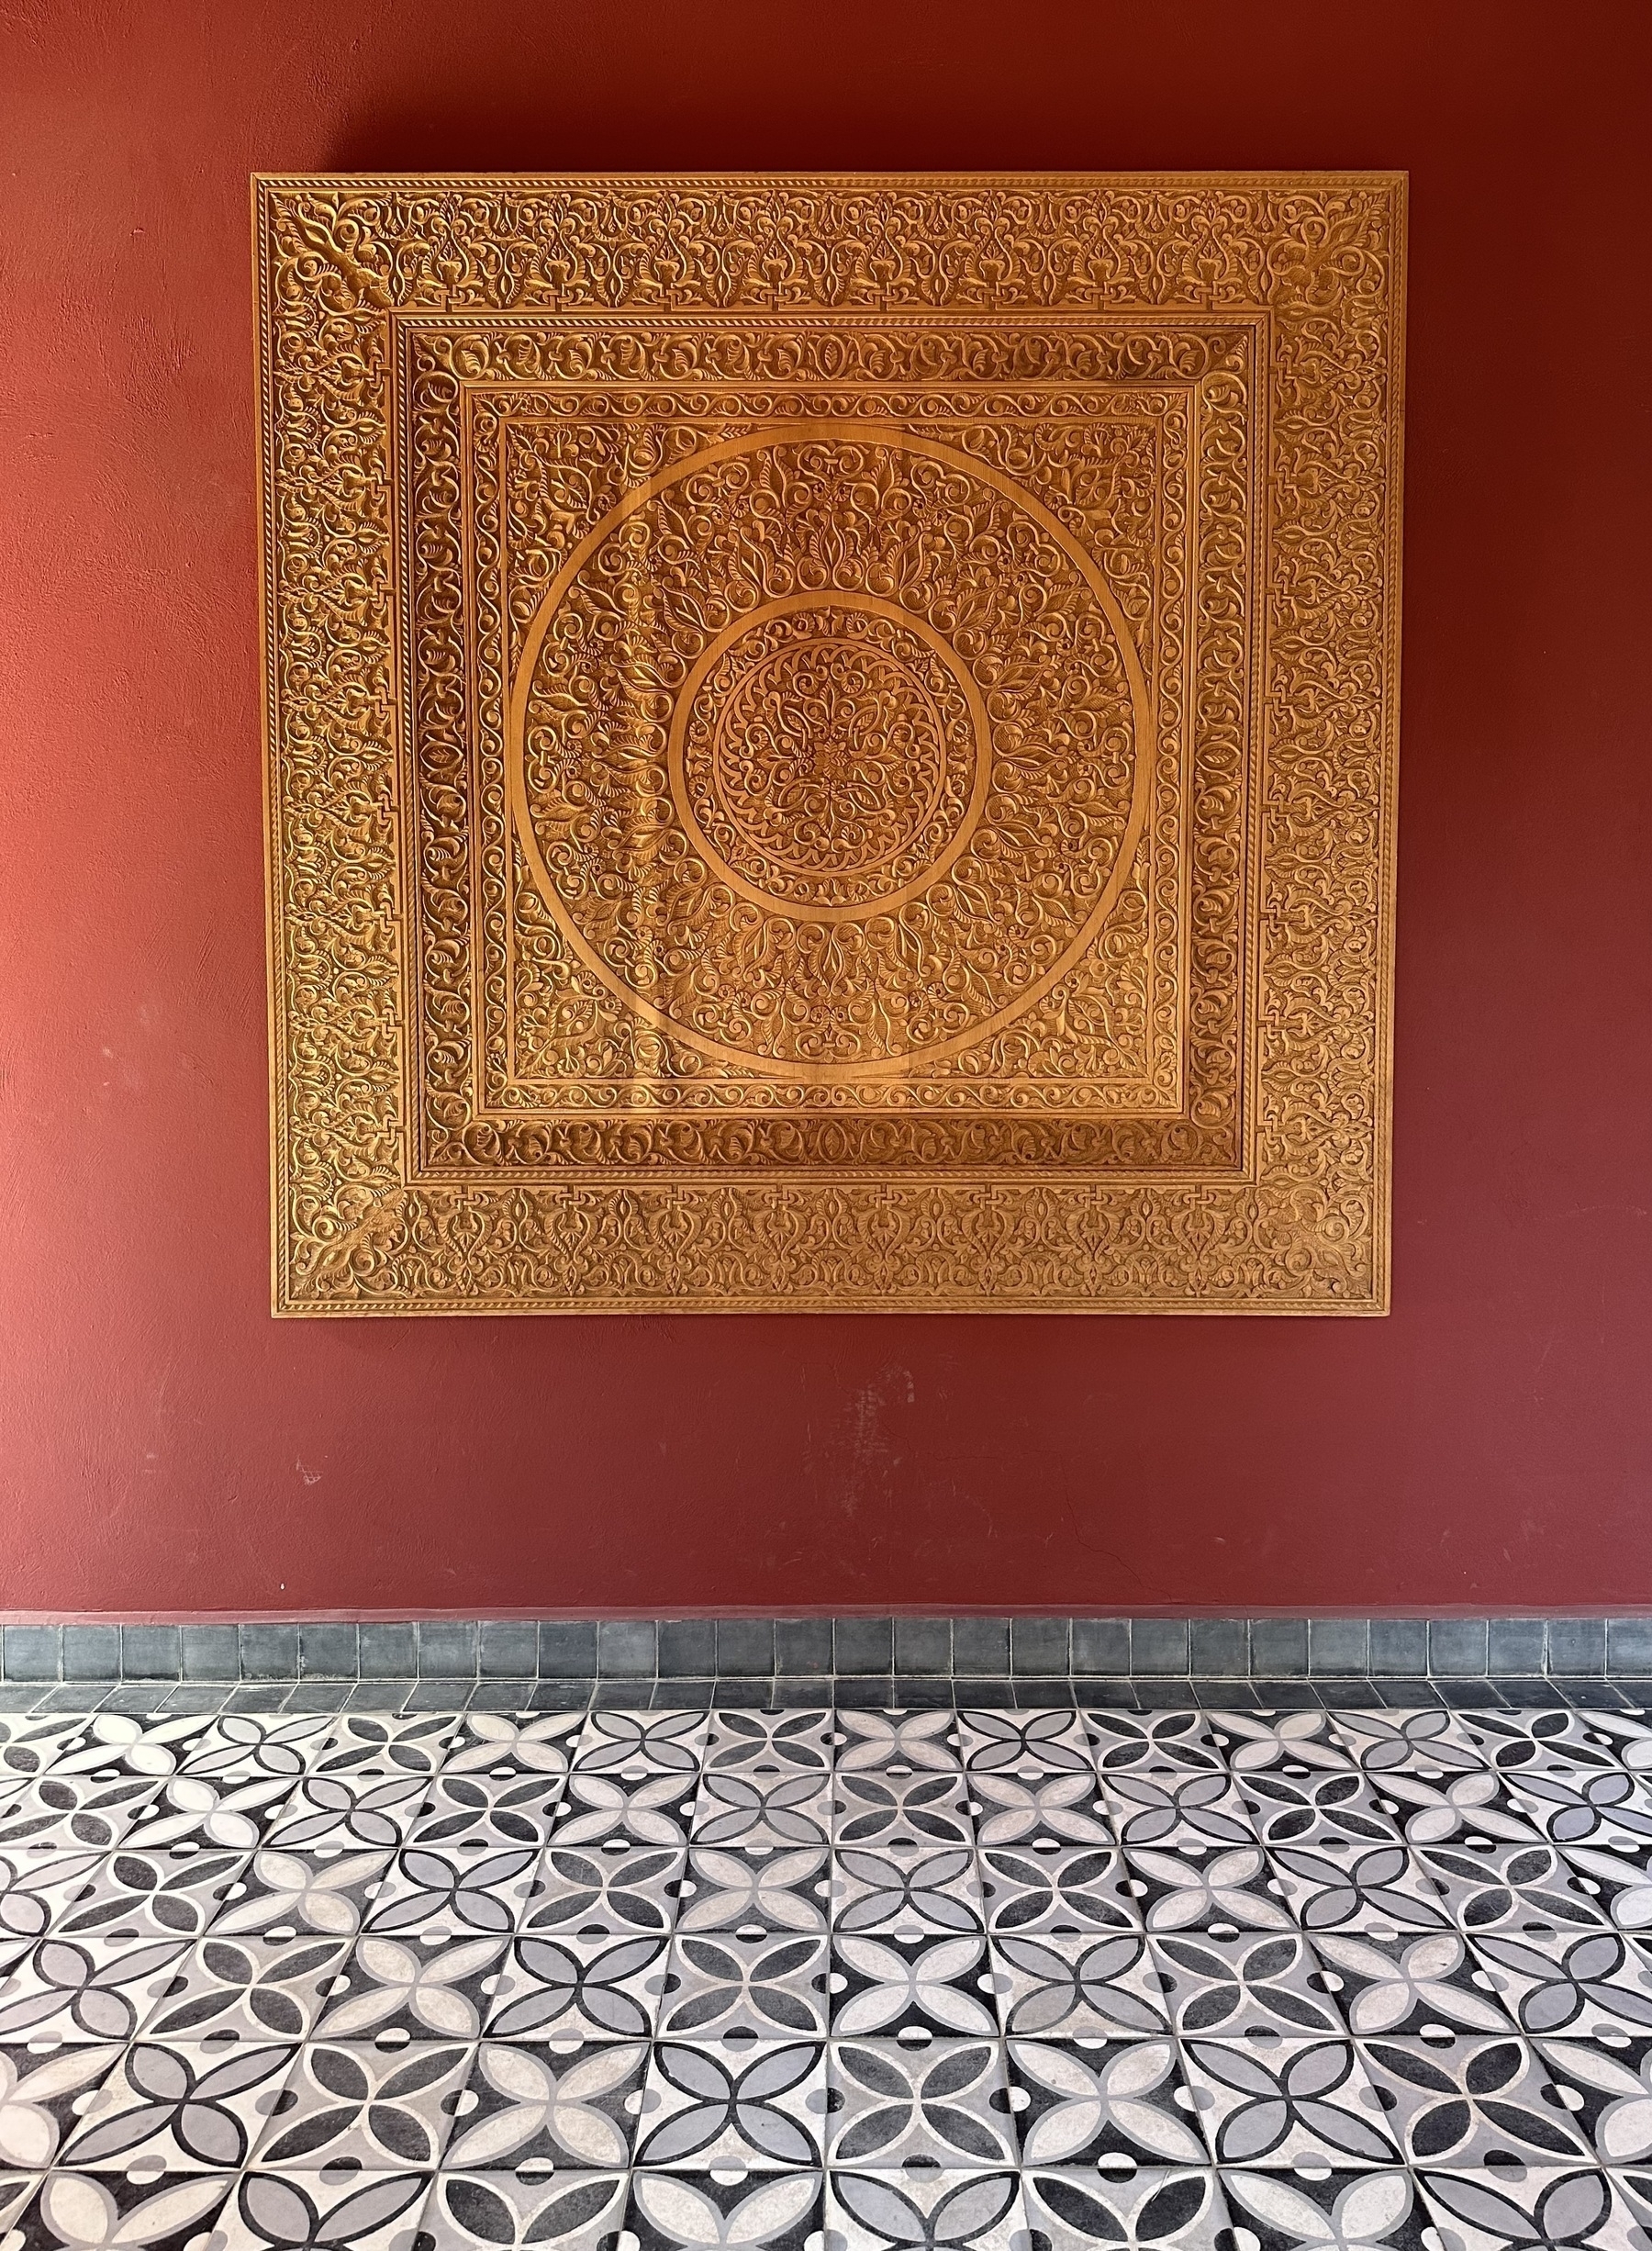 An intricately carved square wooden panel on a red wall, with black and white patterned tiles on the floor.